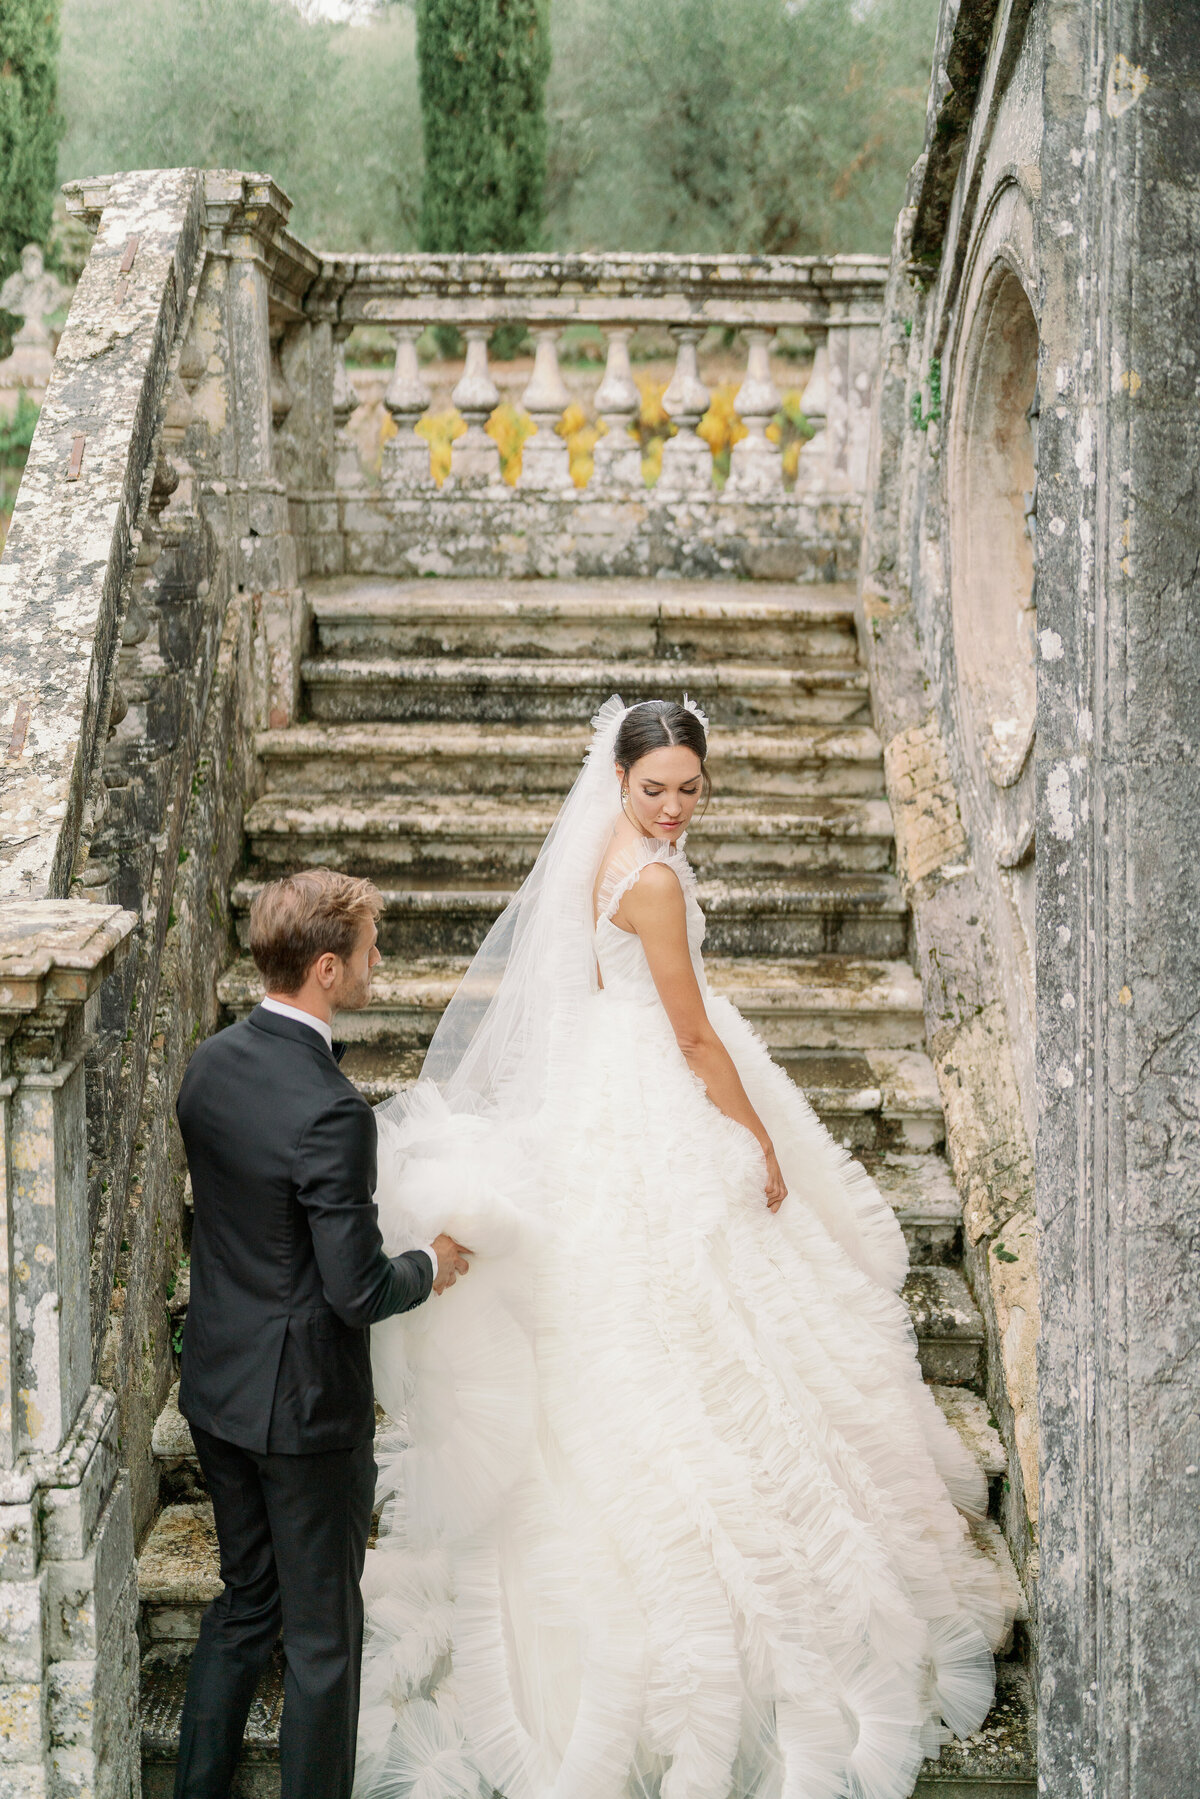 bride going up steps looking back at her groom holding her dress at a villa in Tuscany Italy